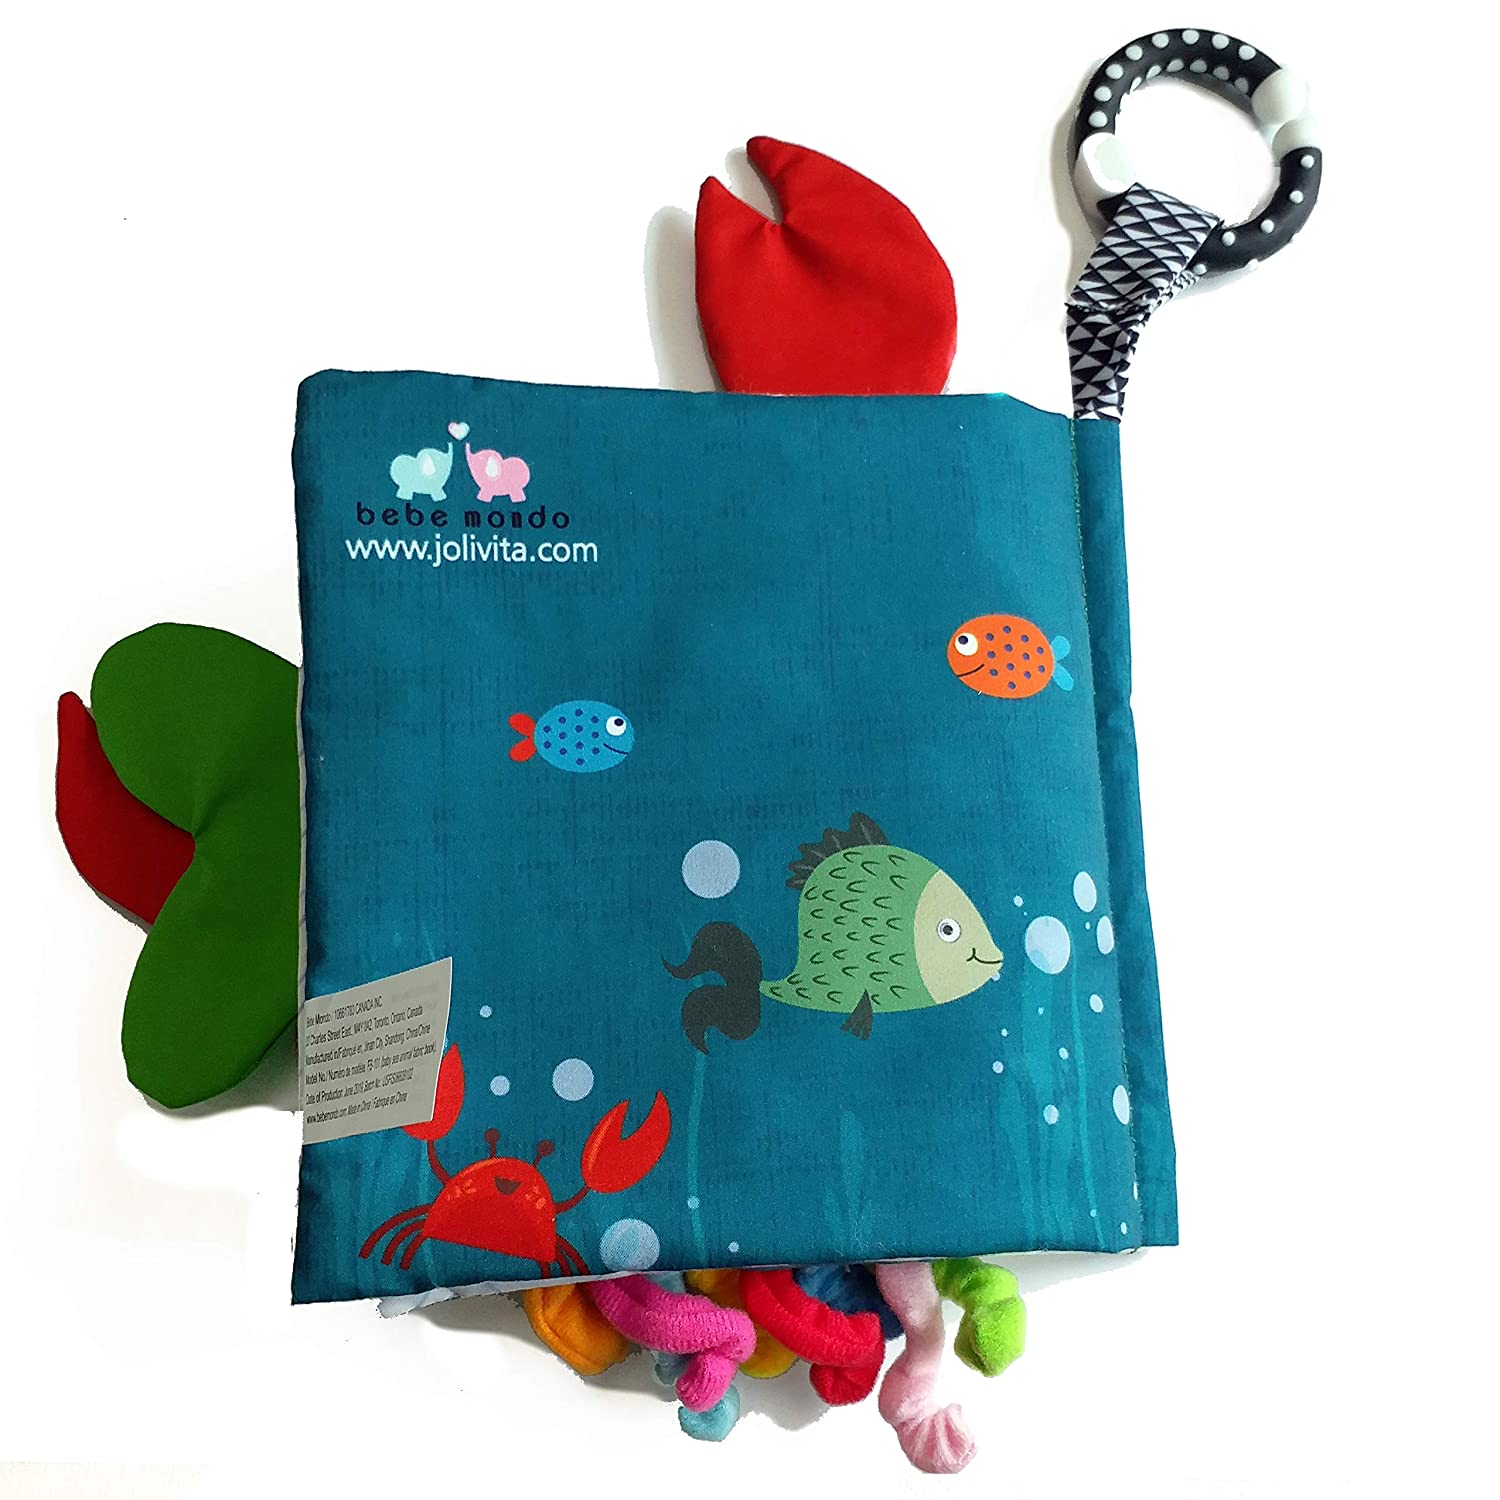 Fish Soft Cloth Book, Shark Tails Soft Activity Crinkle Baby Books Toys for Early Education for Babies,Toddlers,Infants,Kids, Teether Ring,Teething Baby Book Baby Shark,Octopus, Ocean Sea Animal Books